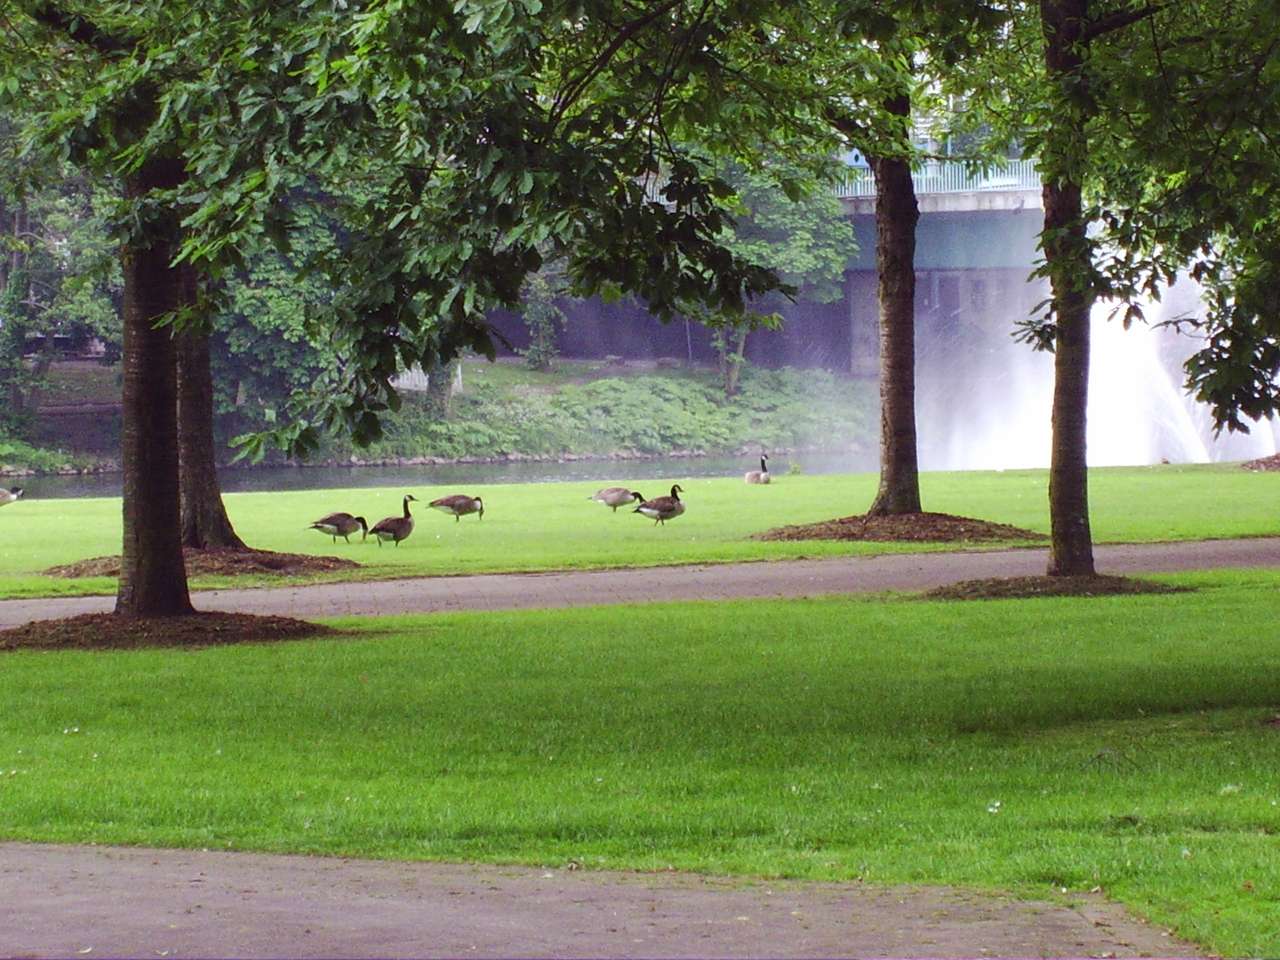 Geese in a park in Mulheim jigsaw puzzle online